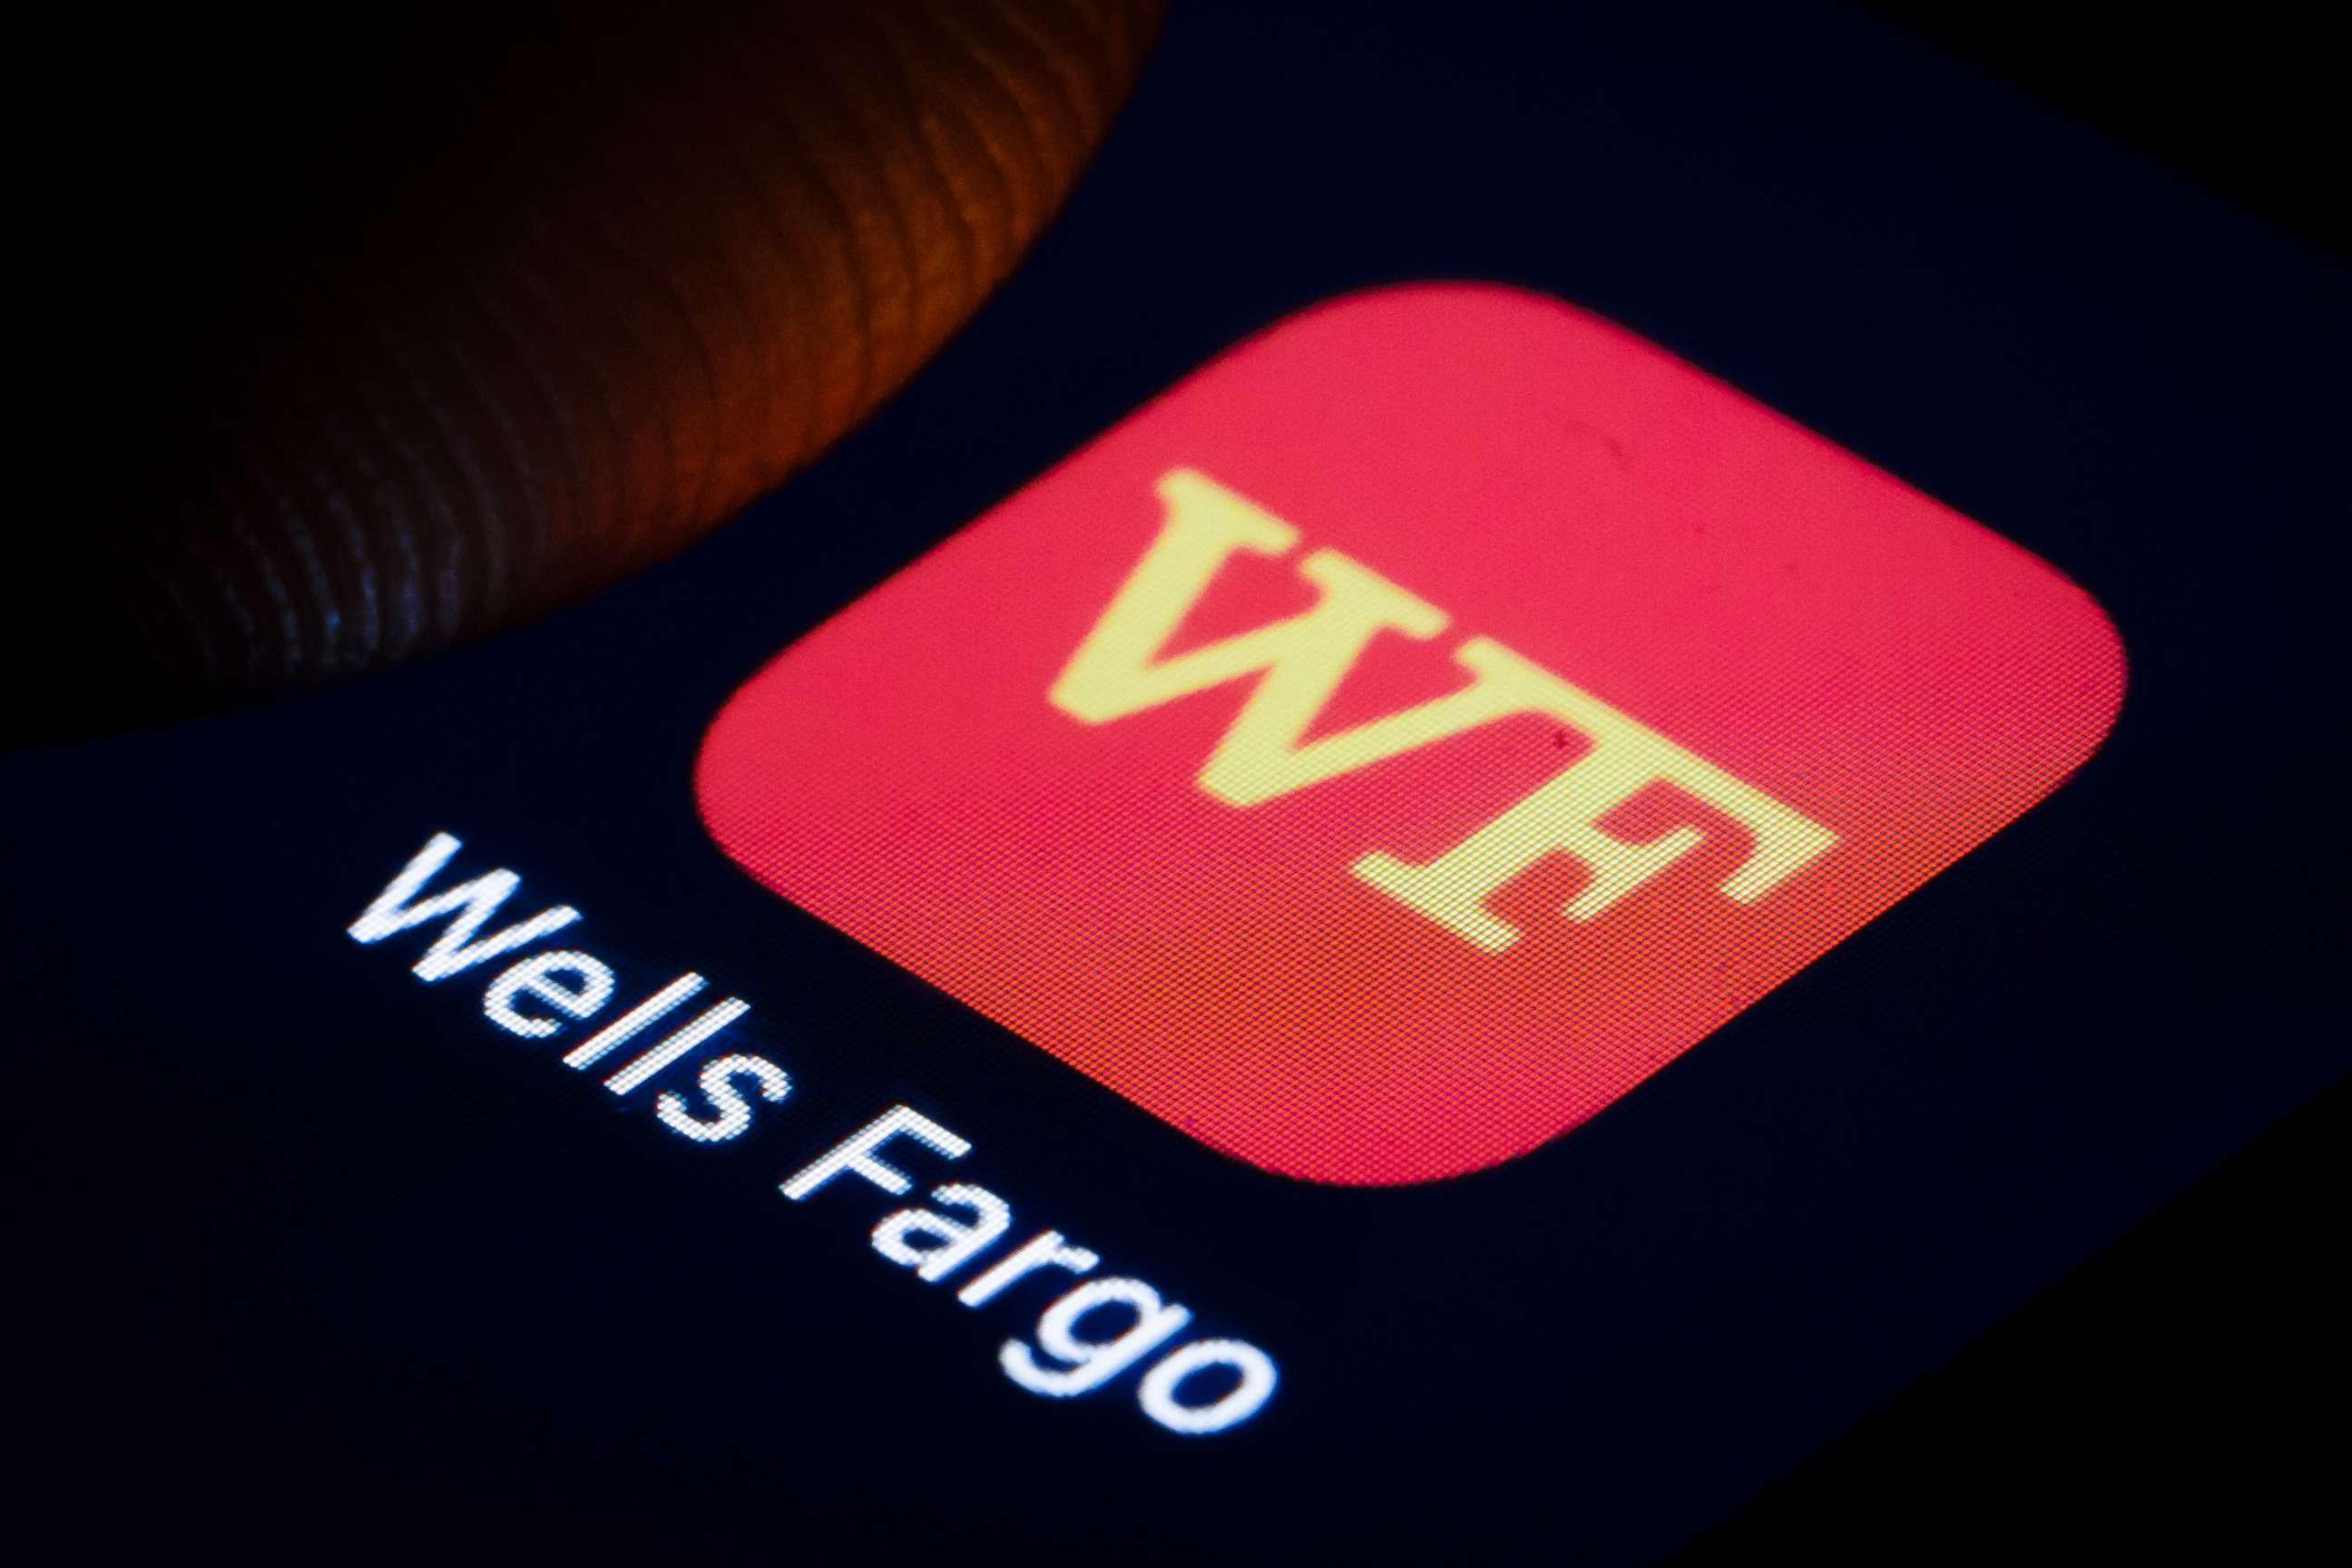 PHOTO: The logo of American multinational financial services company Wells Fargo is displayed on a smartphone on Jan. 02, 2019, in Berlin.